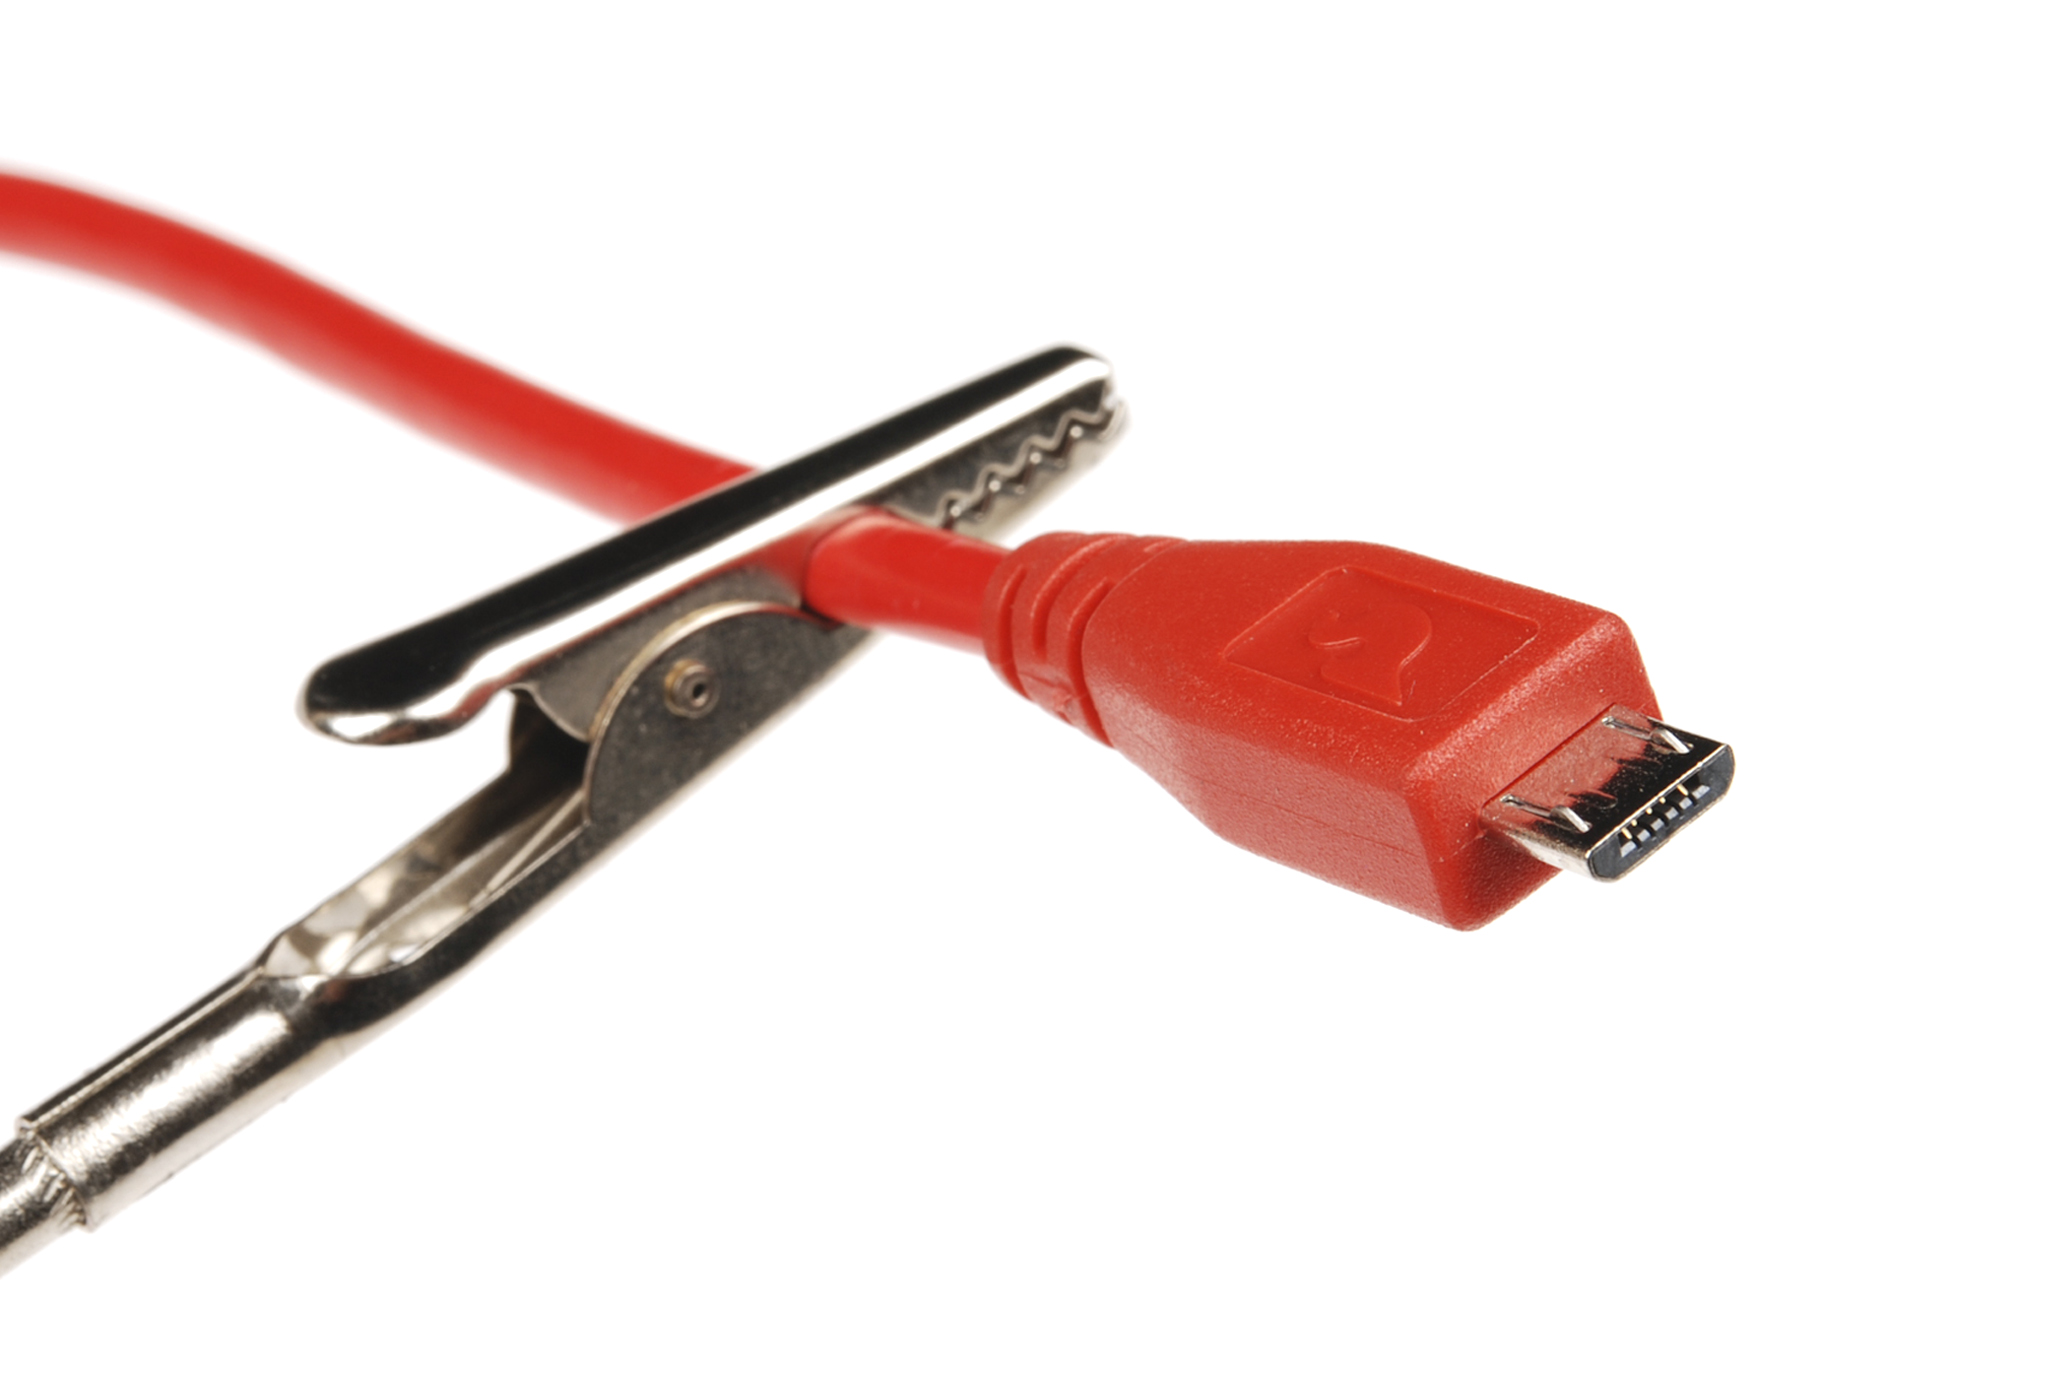 How To Identify USB Cable Connectors